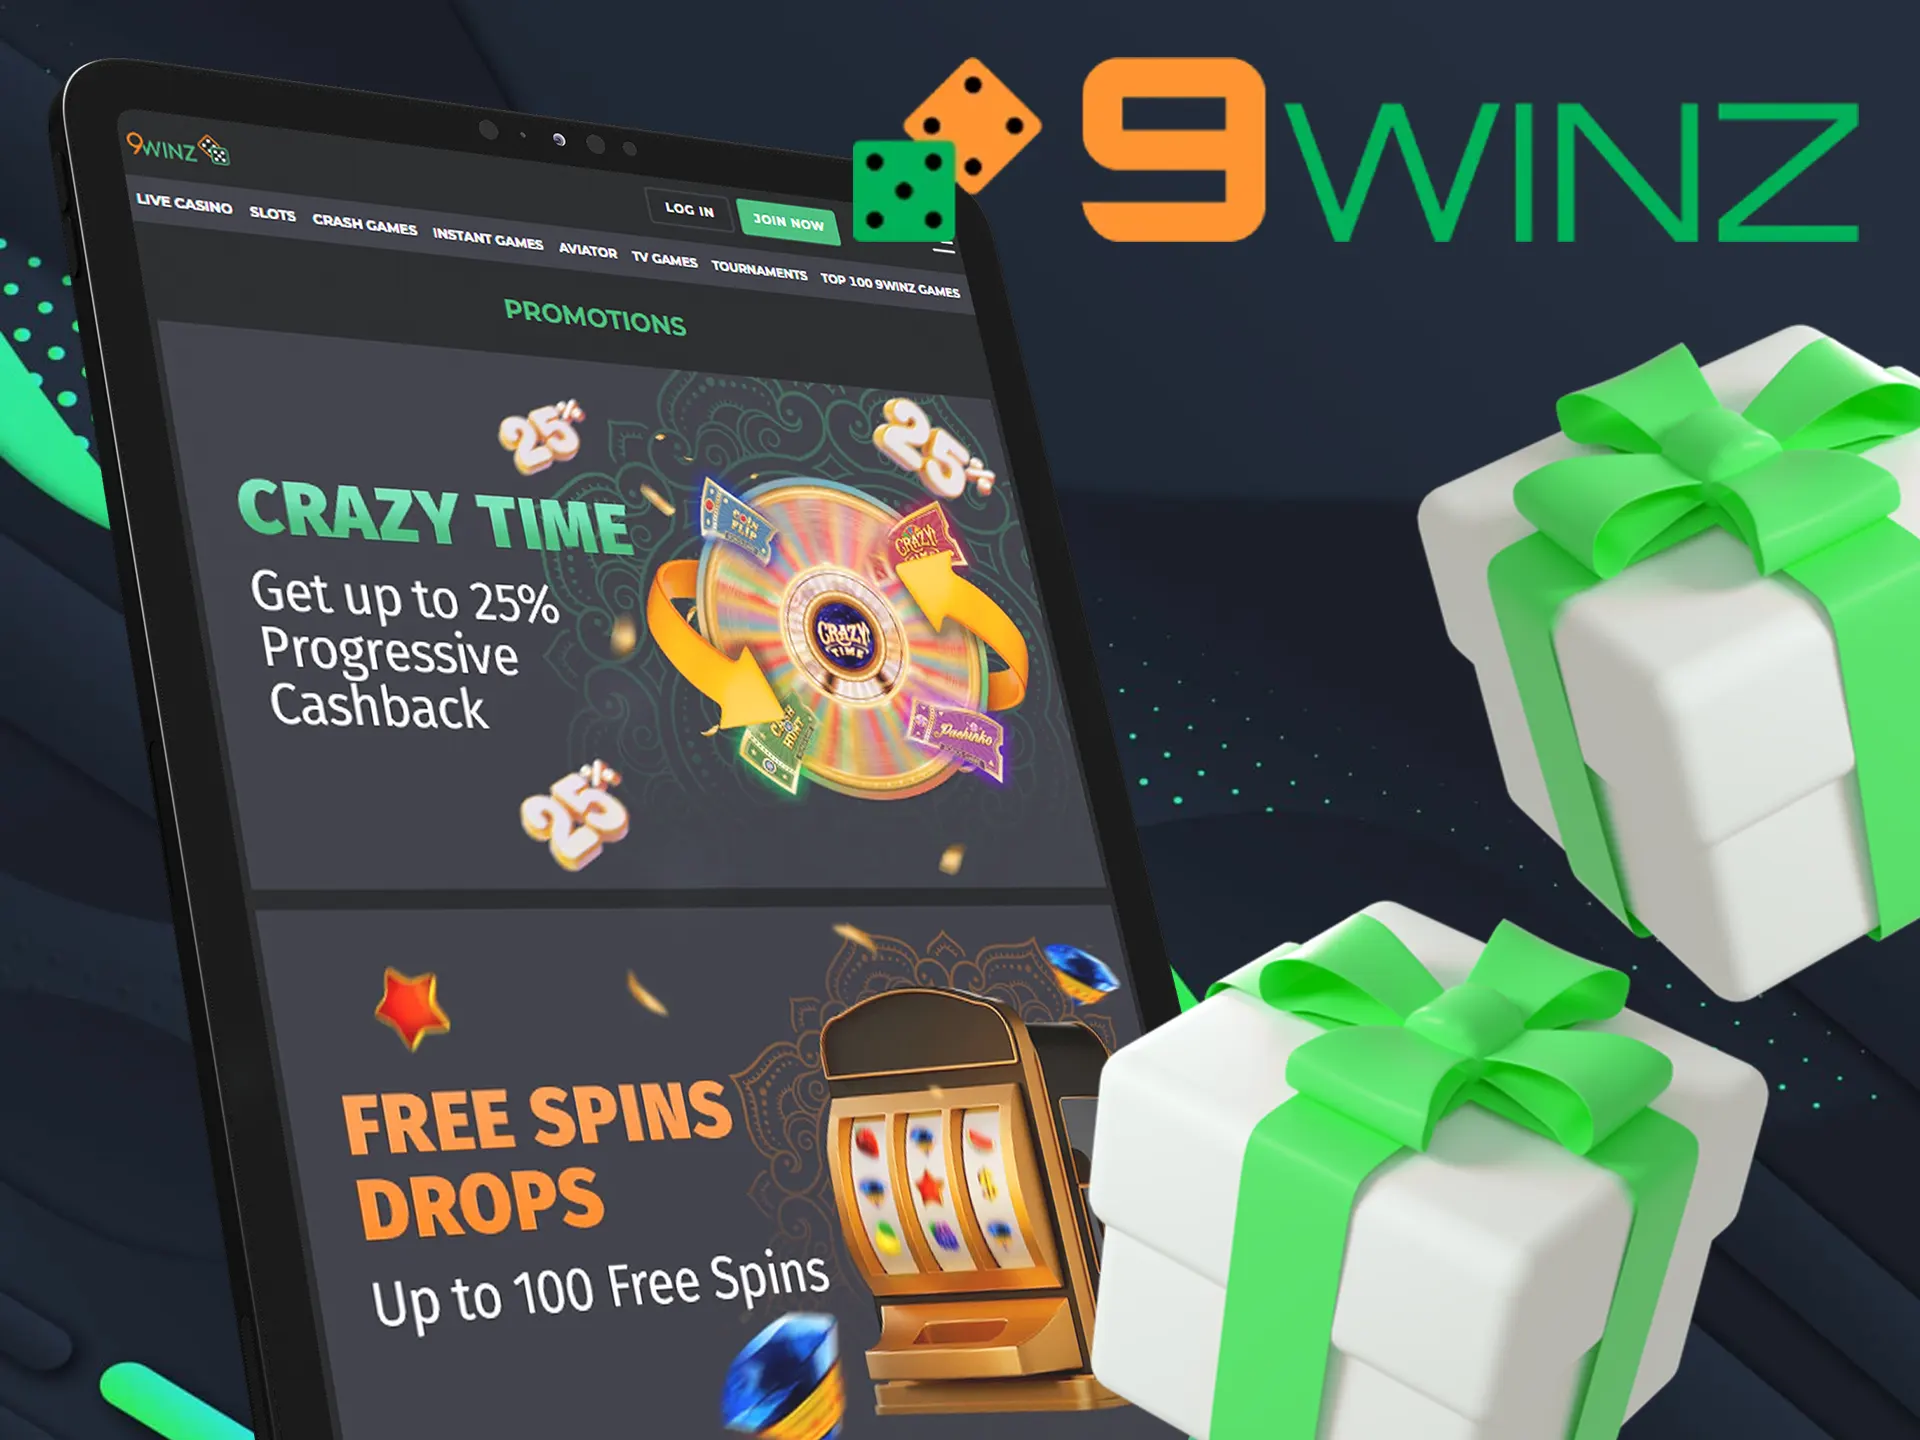 Claim all of the 9winz bonuses for slot games.